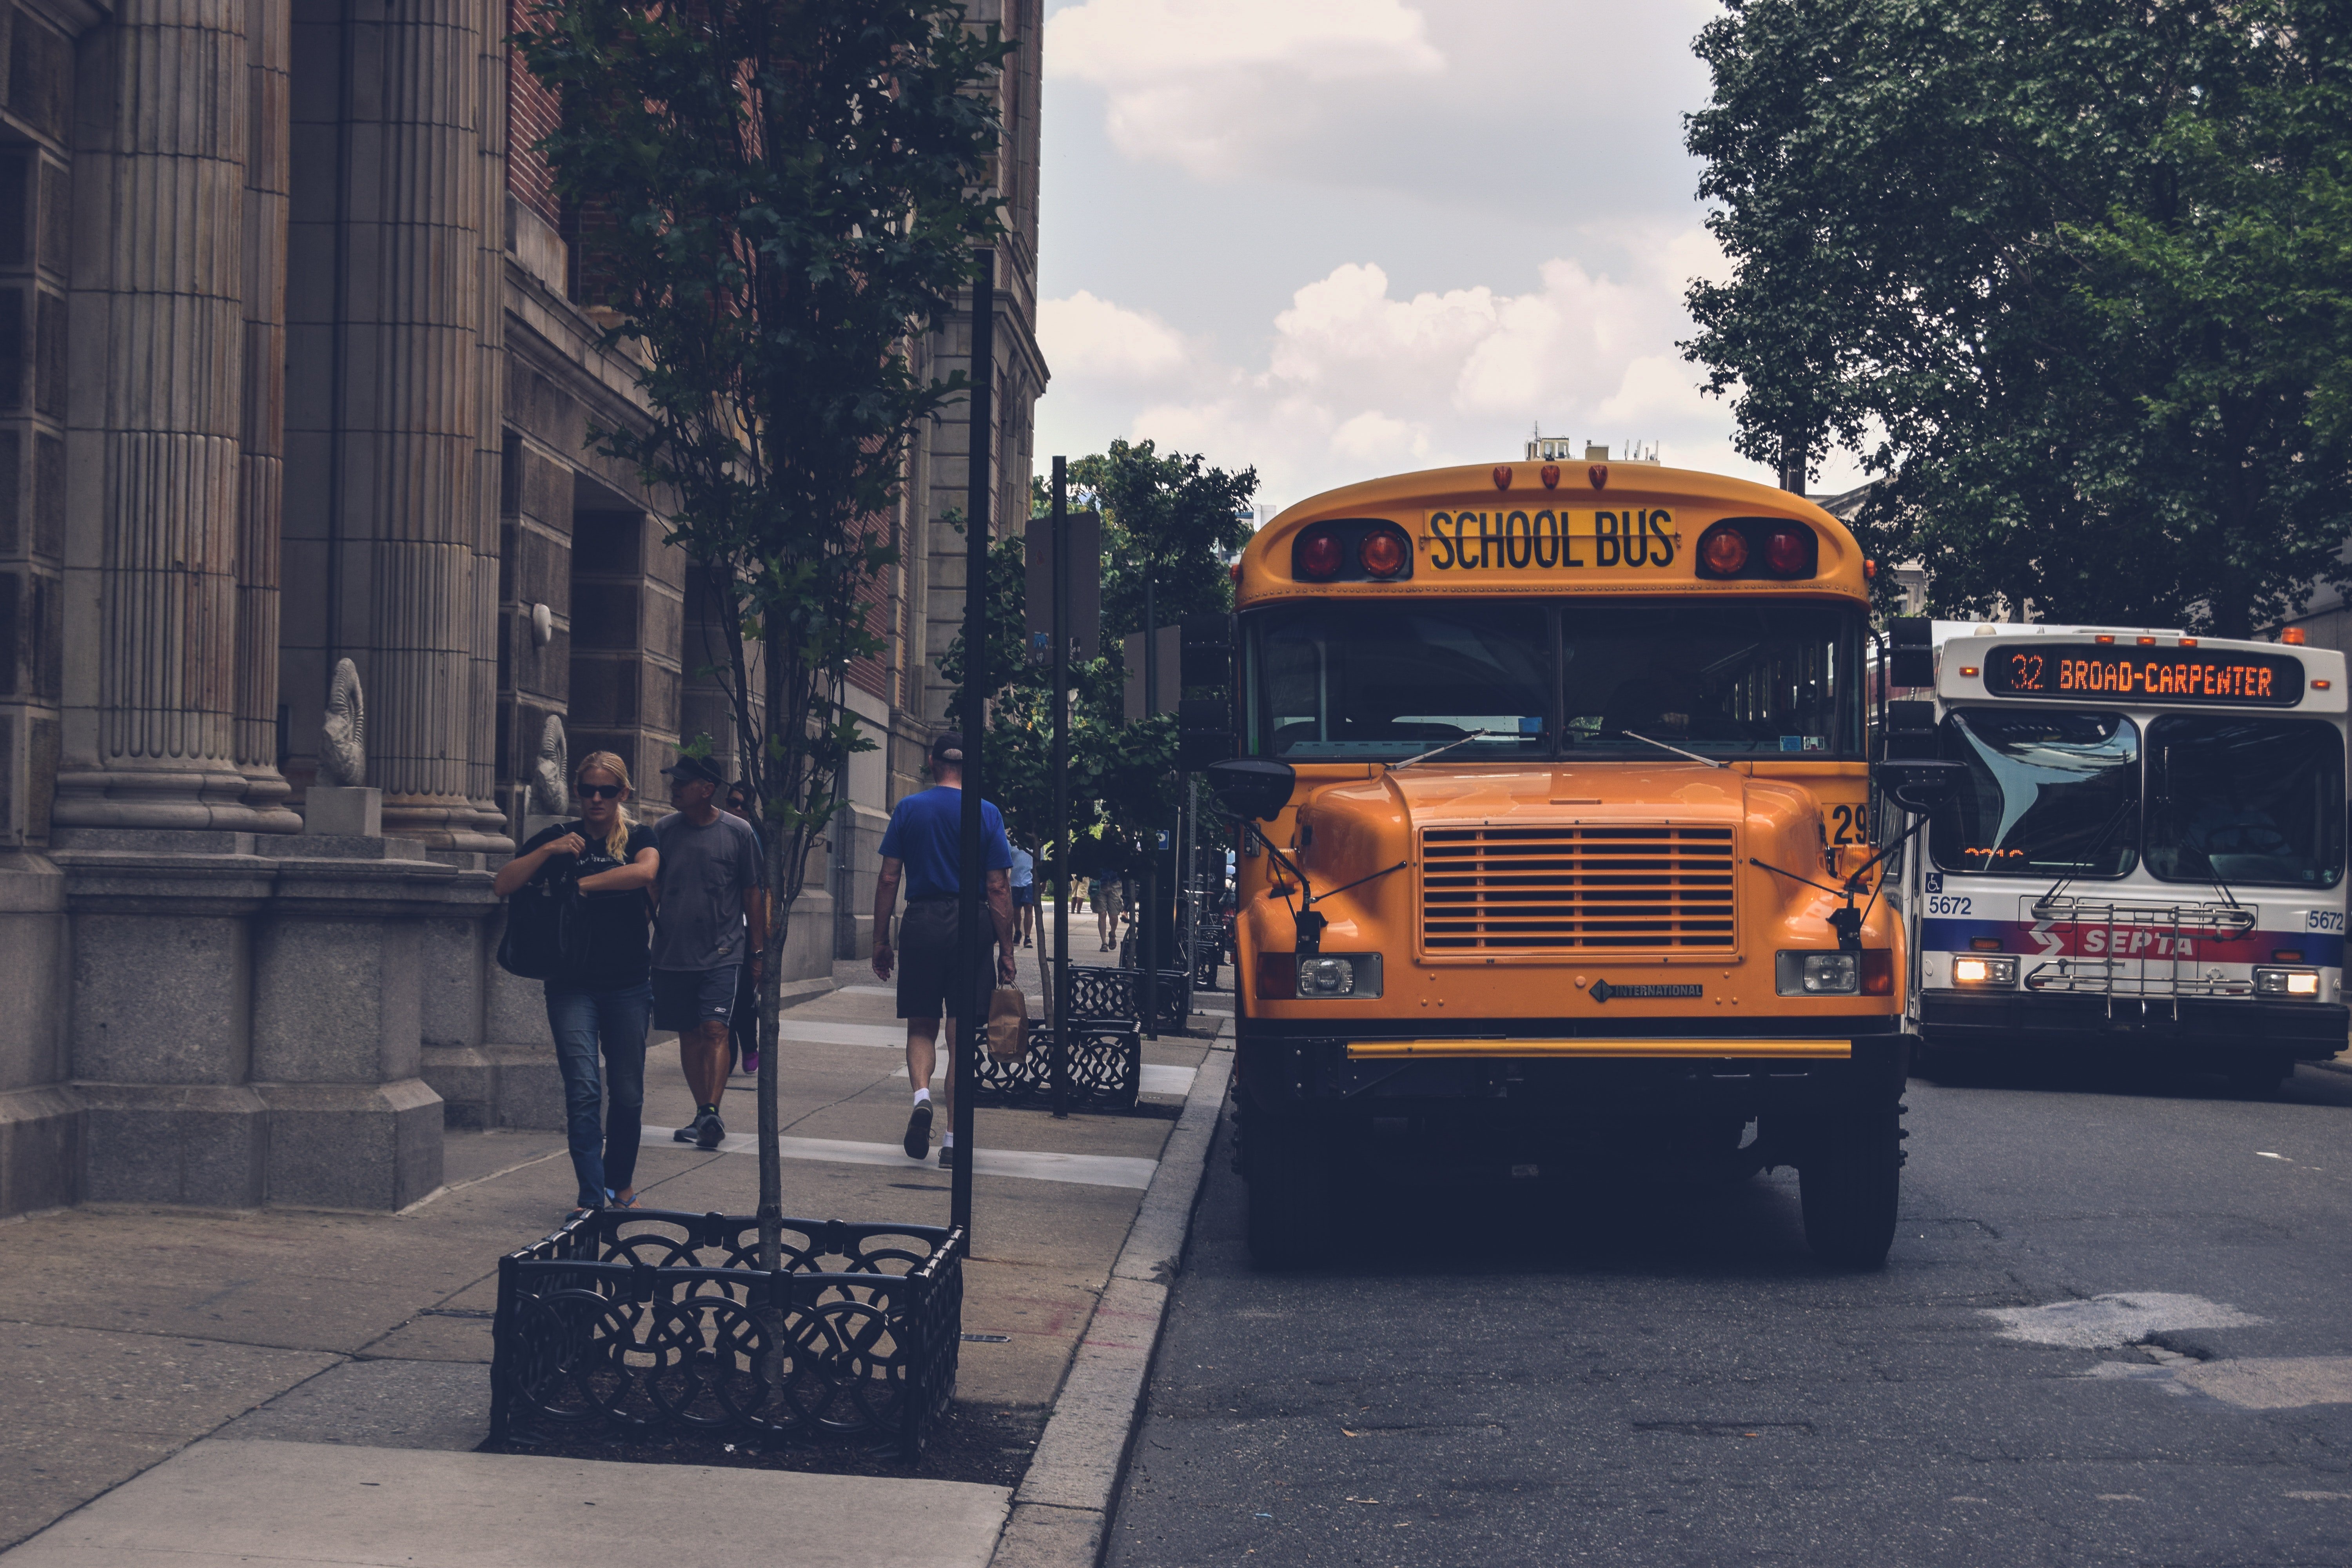 Elizabeth tried searching for their school bus, but she could not find it. | Source: Pexels